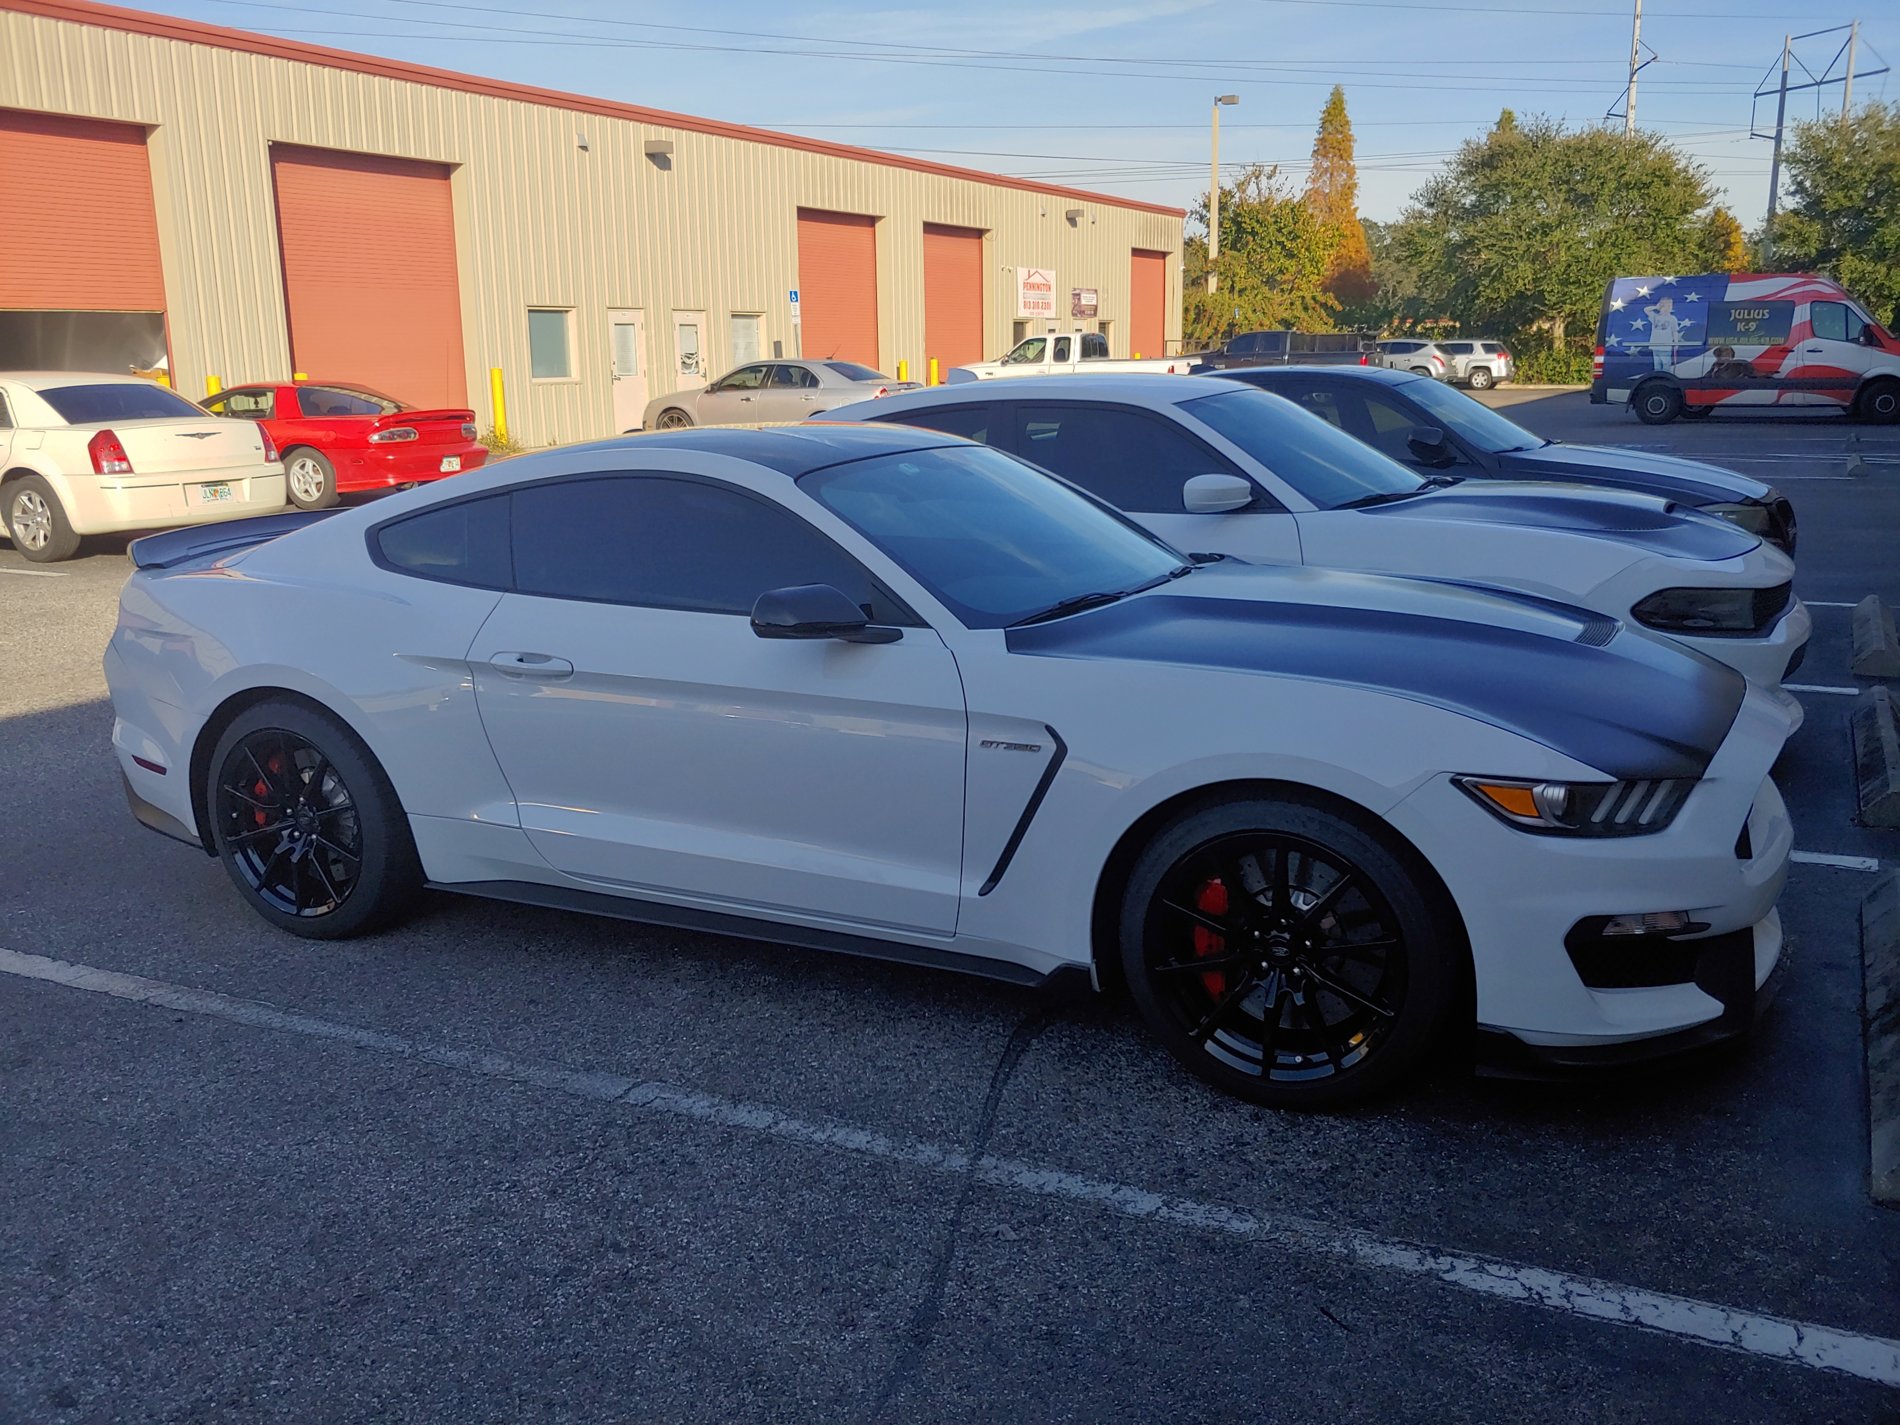 S650 Mustang Post Pictures of Your Car 20191205_153857_HDR